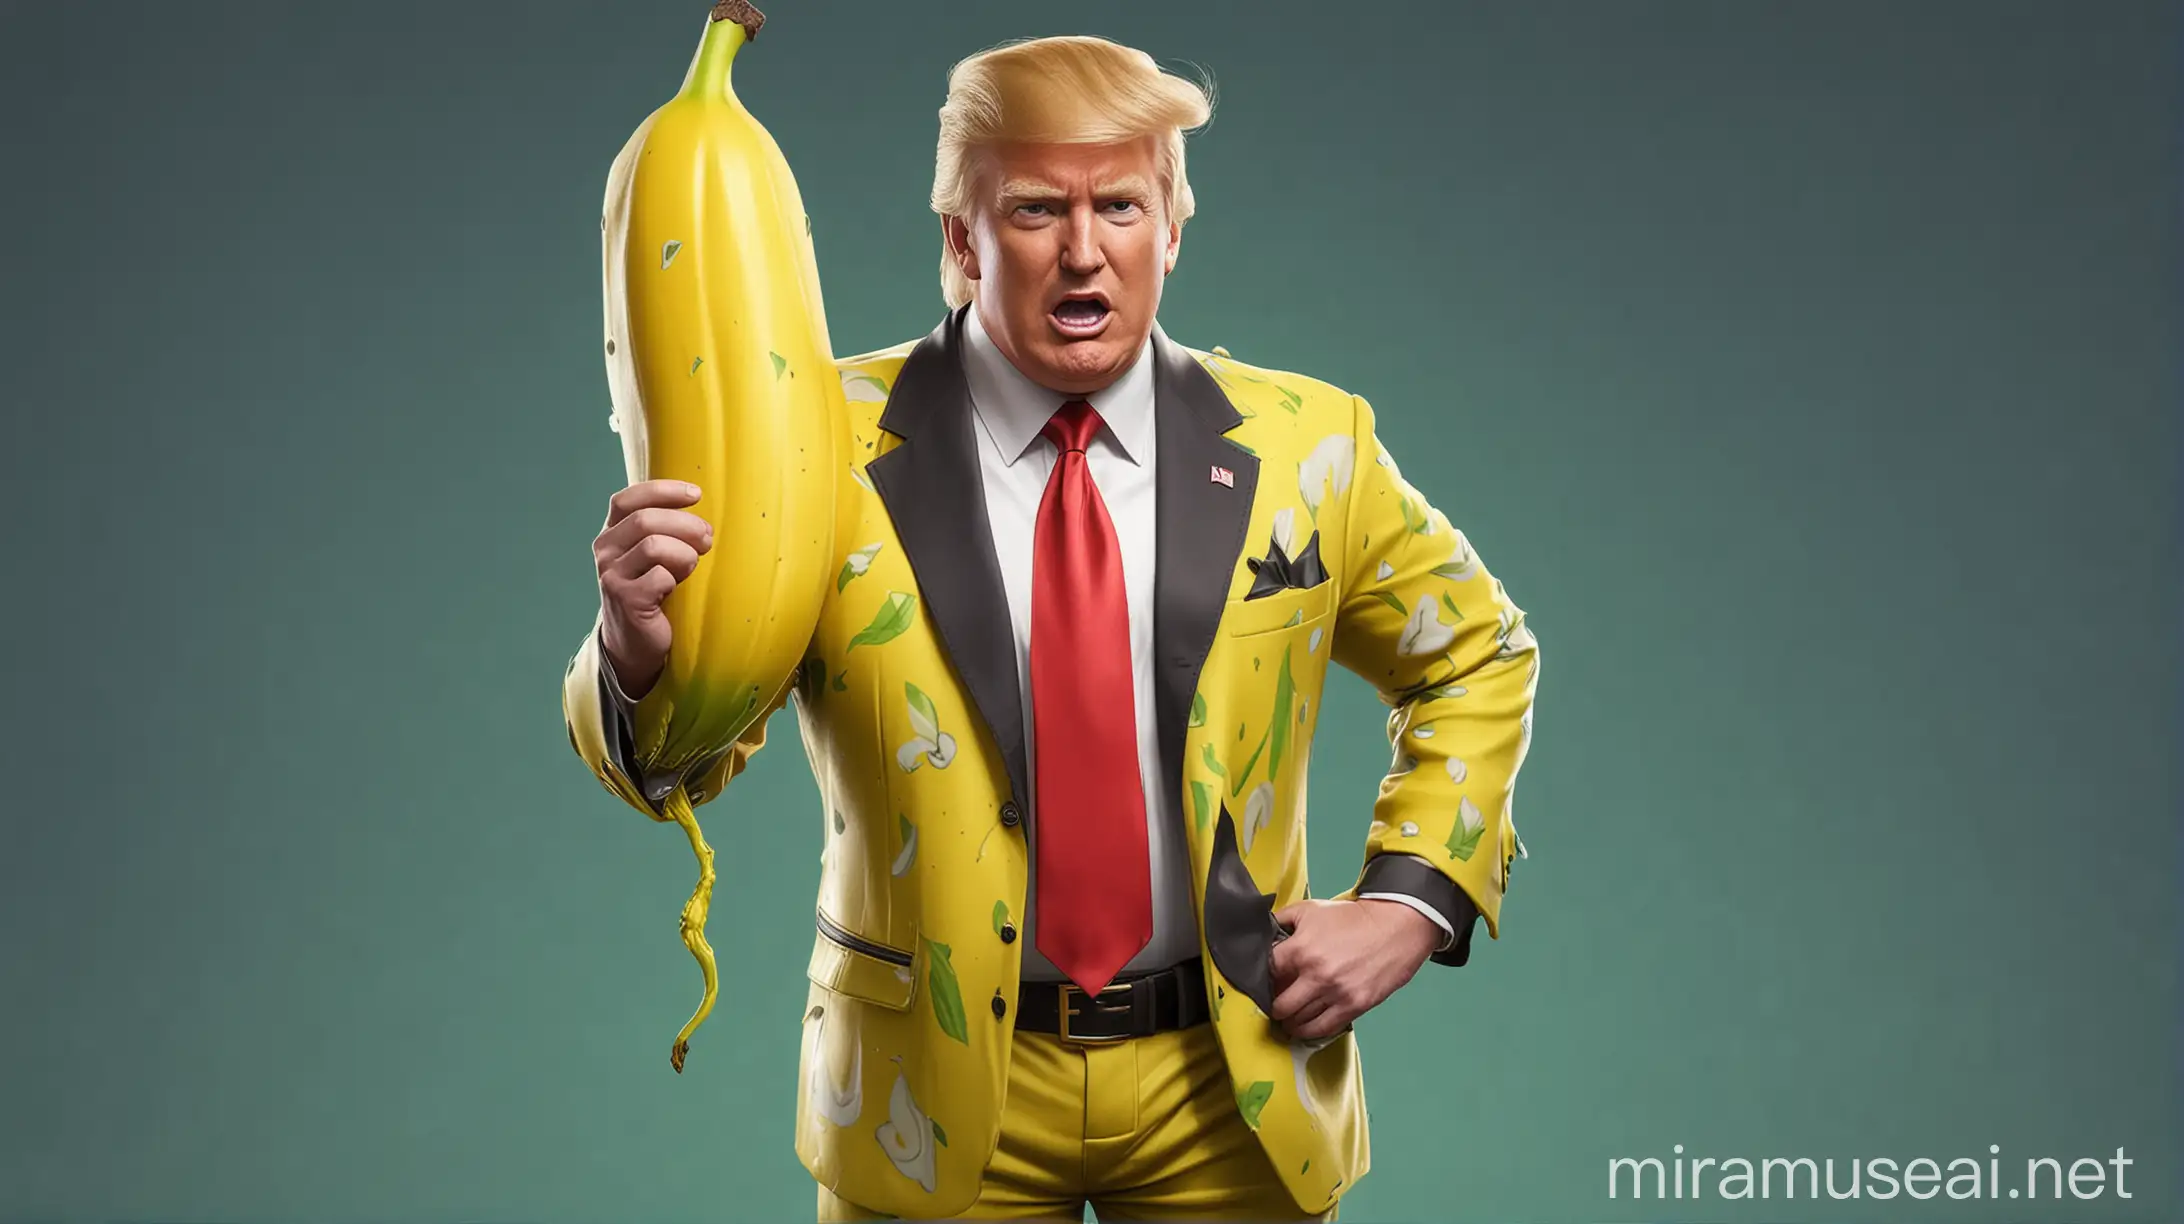 Fornite style Donald Trump wearing a banana suit with bright green Fortnite background